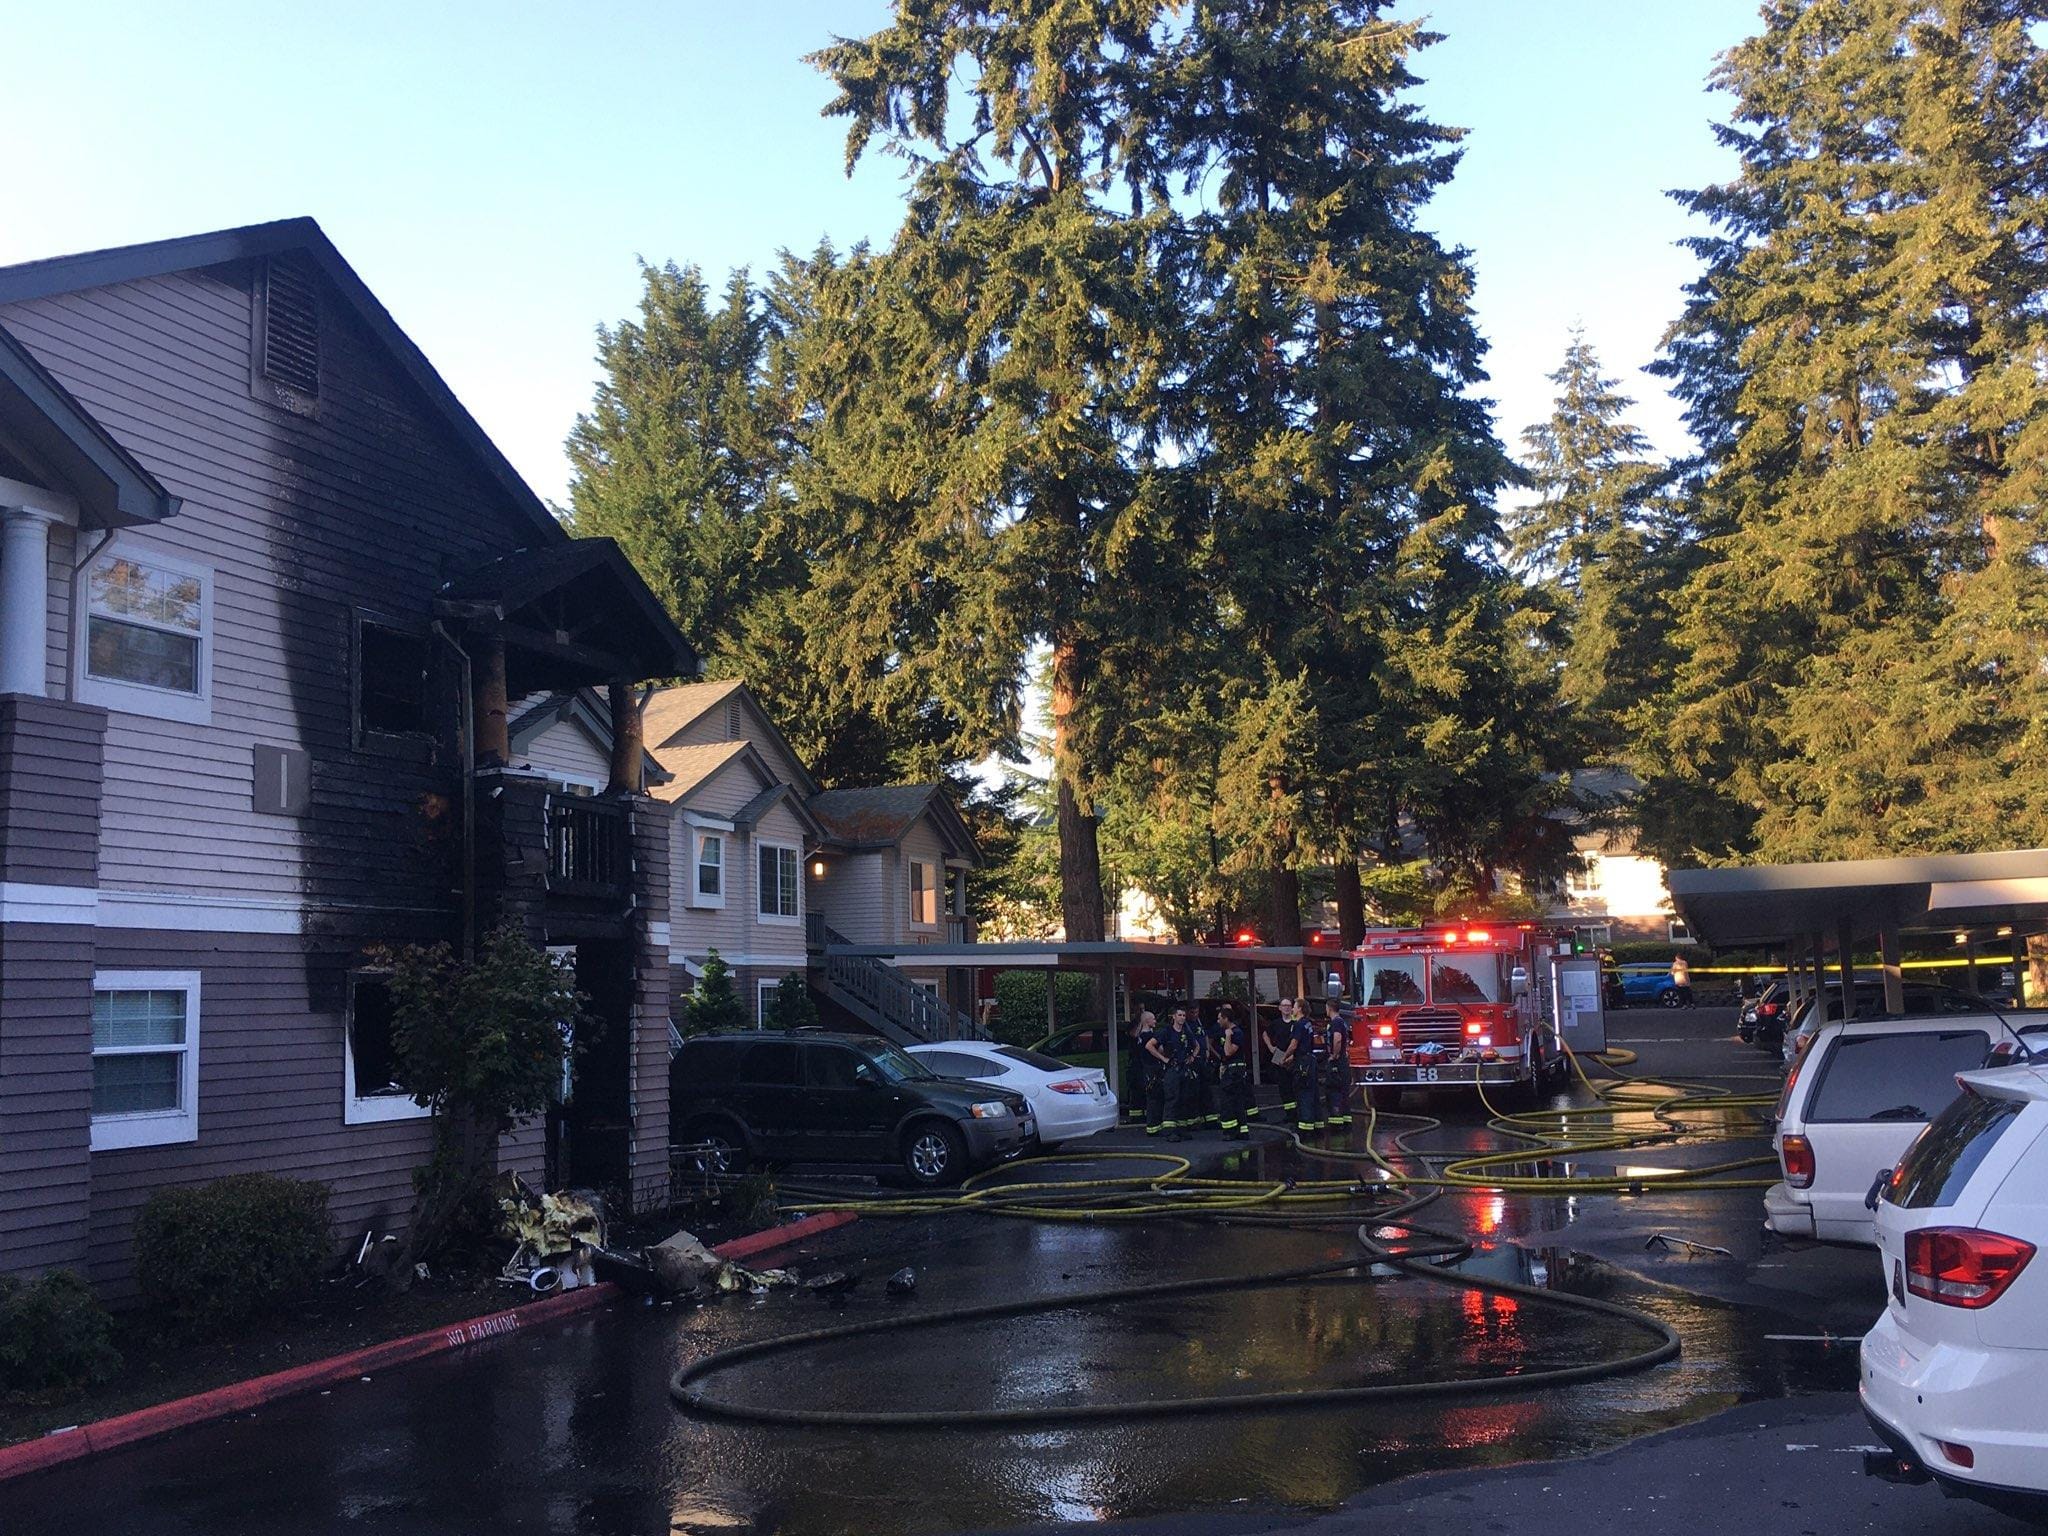 Several people were injured in an apartment fire Wednesday night in east Vancouver.